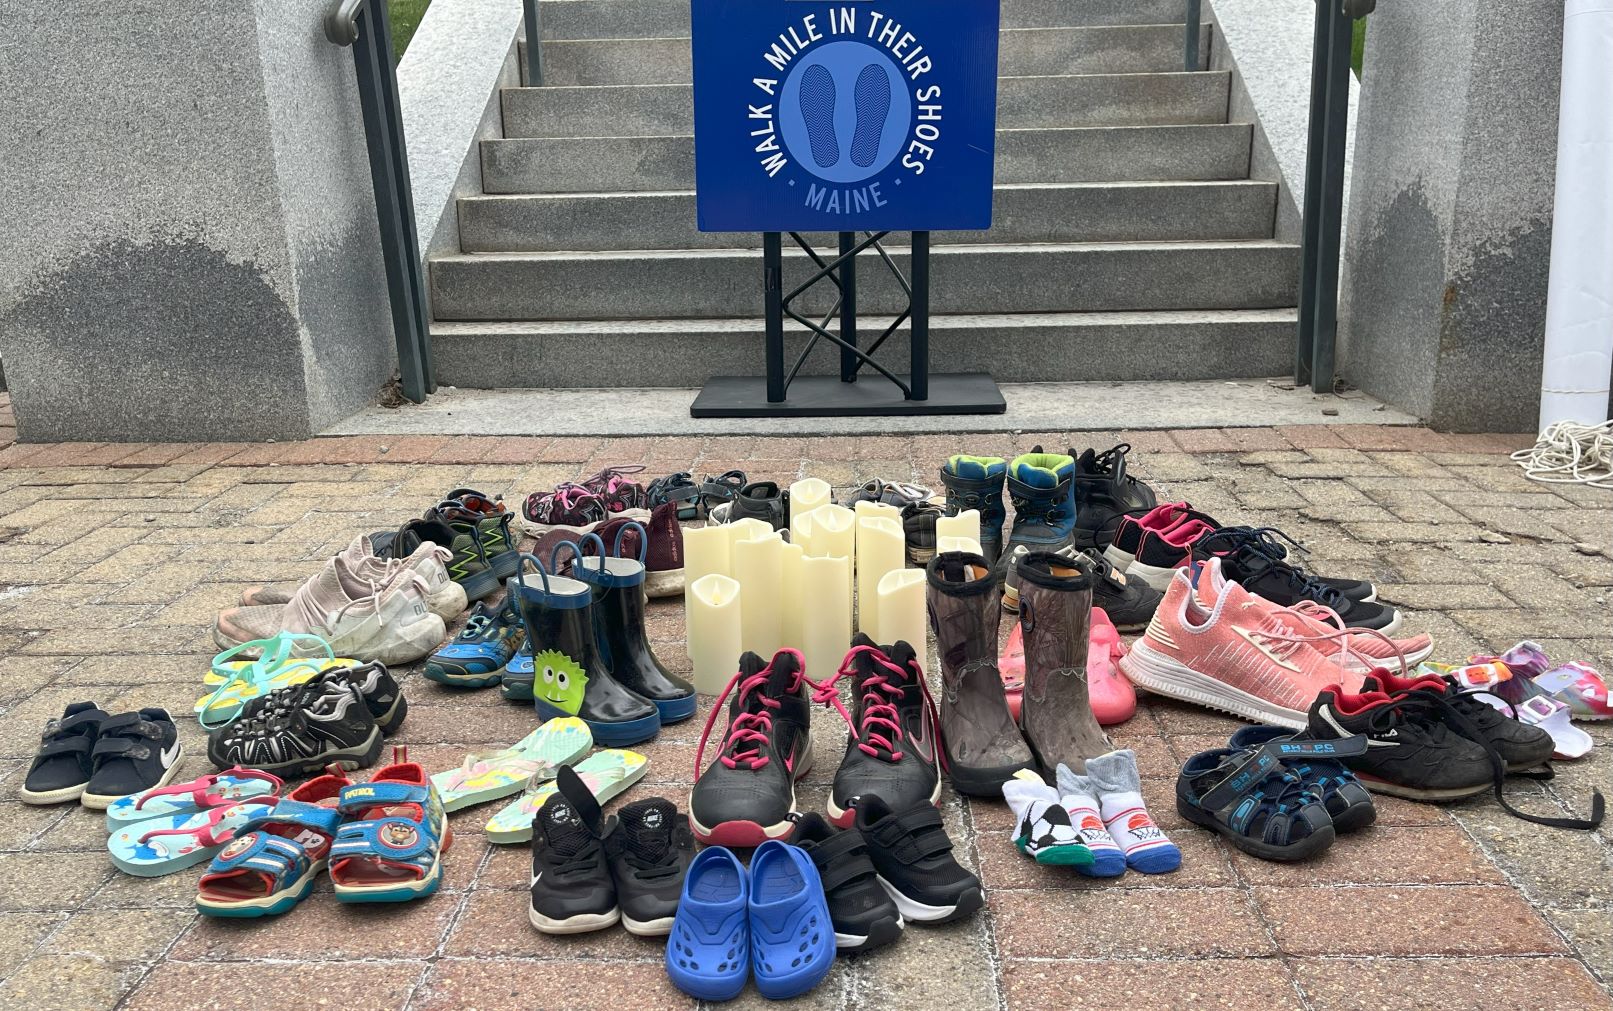 A pile of children's shoes in front of the podium at the rally.